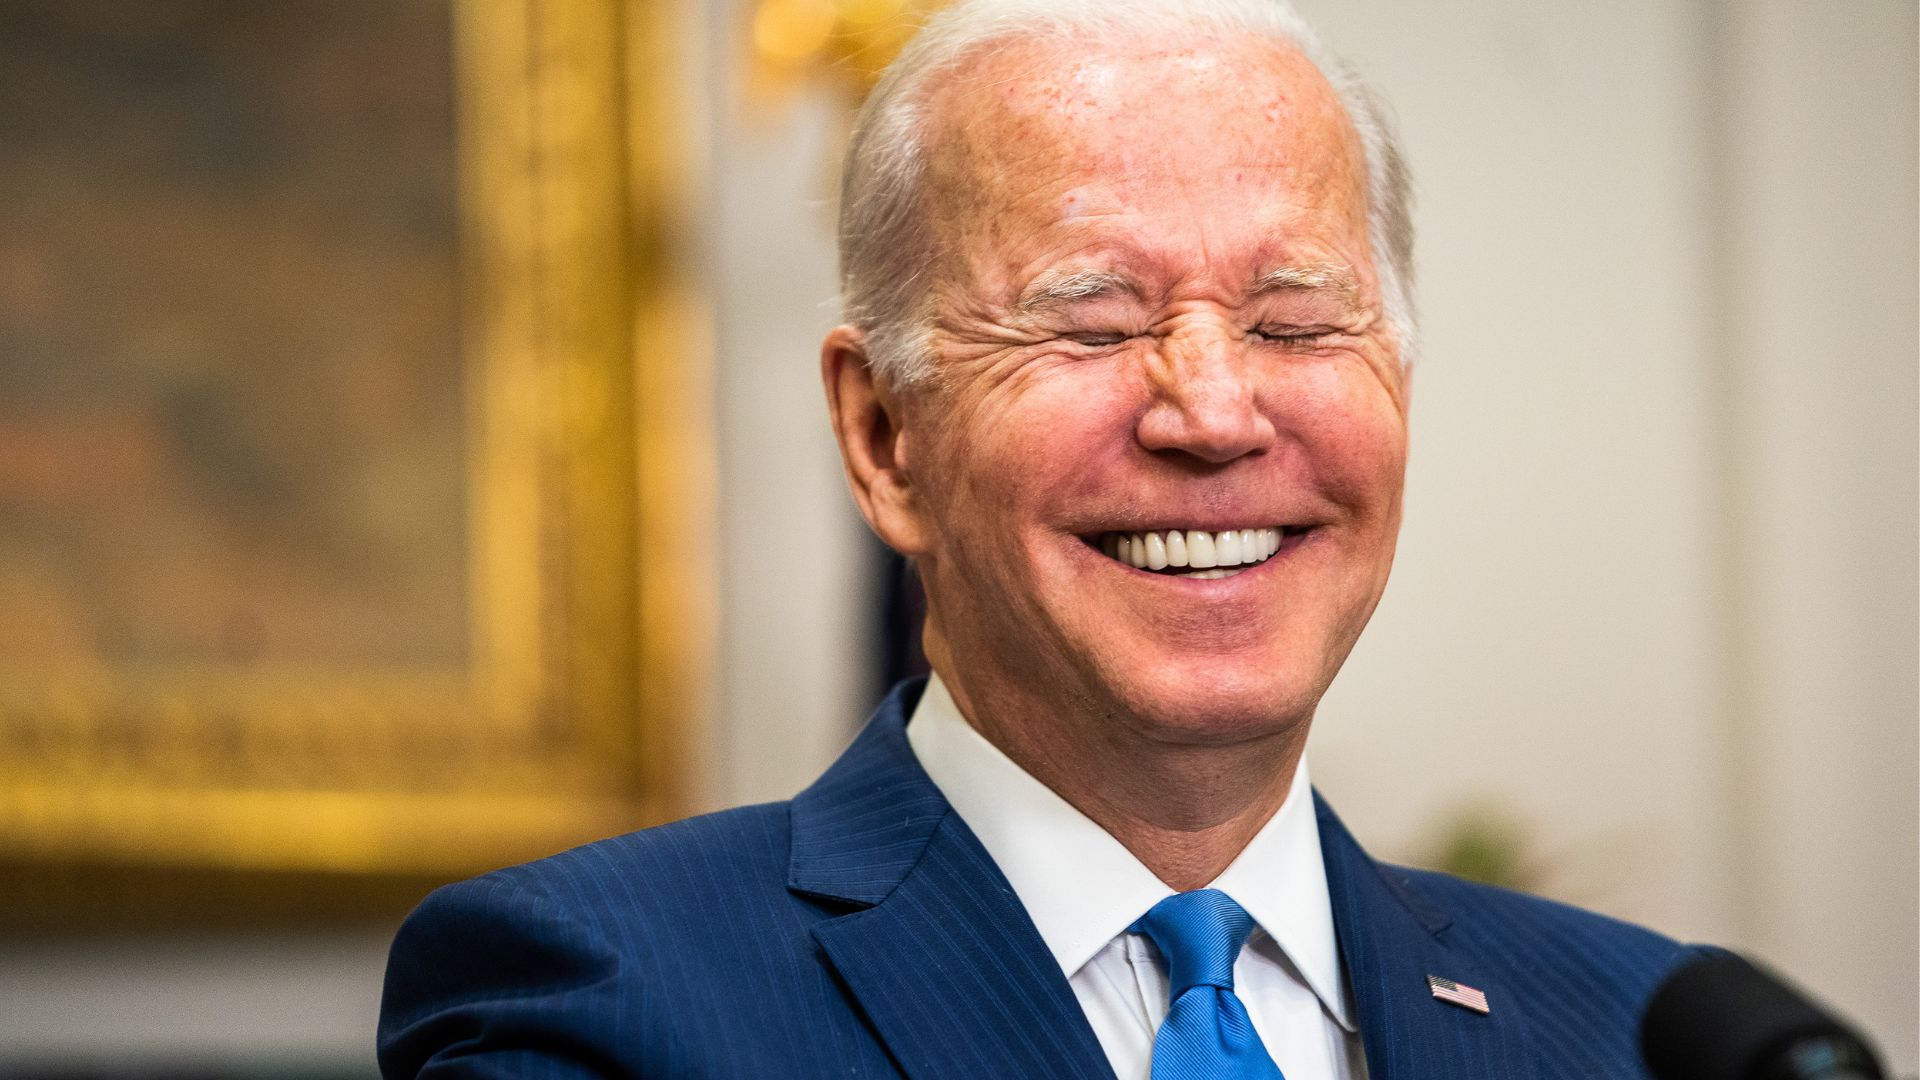 Biden criticized for ‘racist’ comment on ‘African American and Hispanic workers’